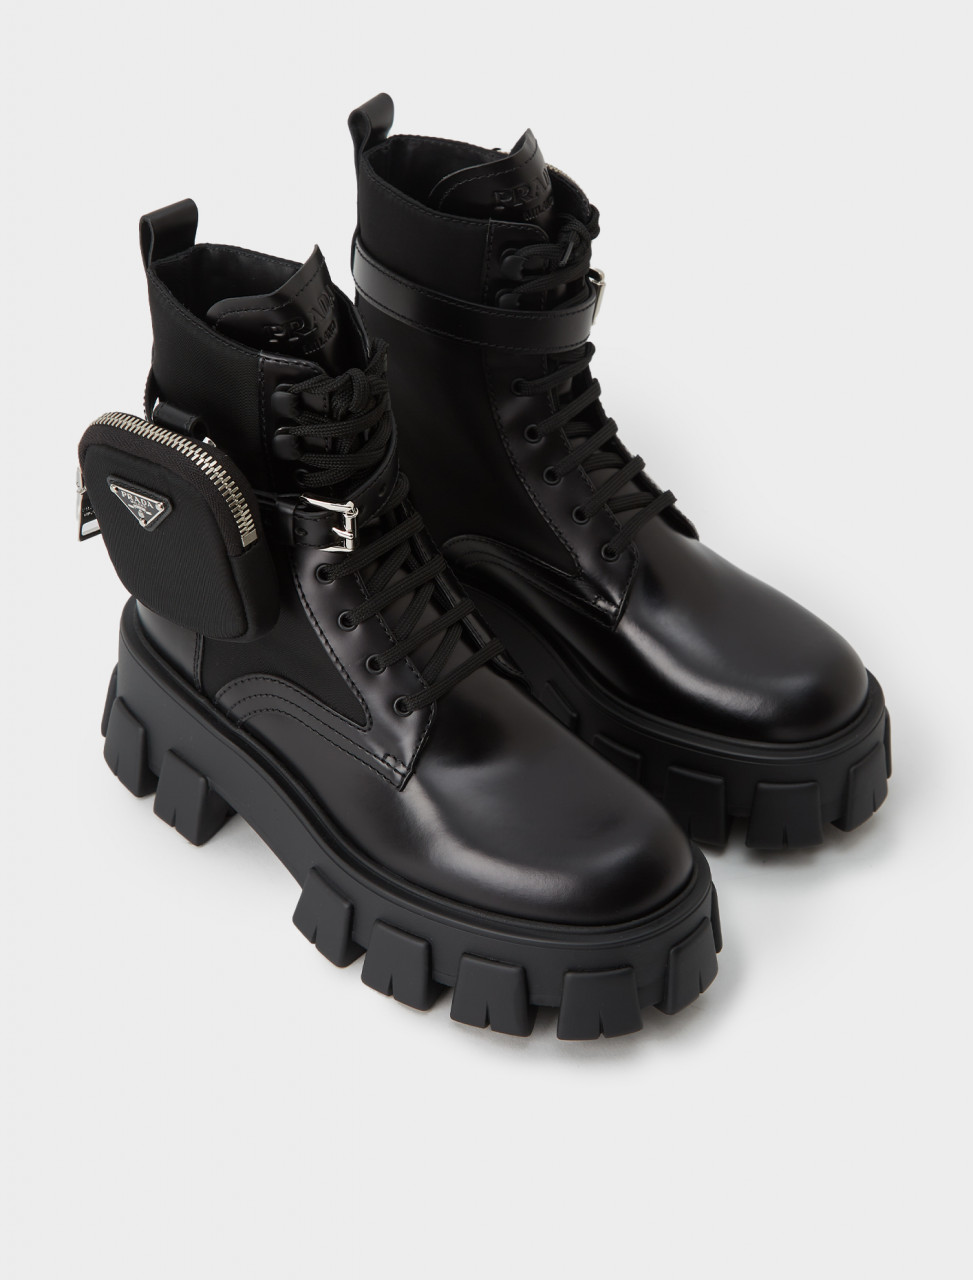 Prada Leather Combat Boots with Removable Nylon Pouch | Voo Store ...